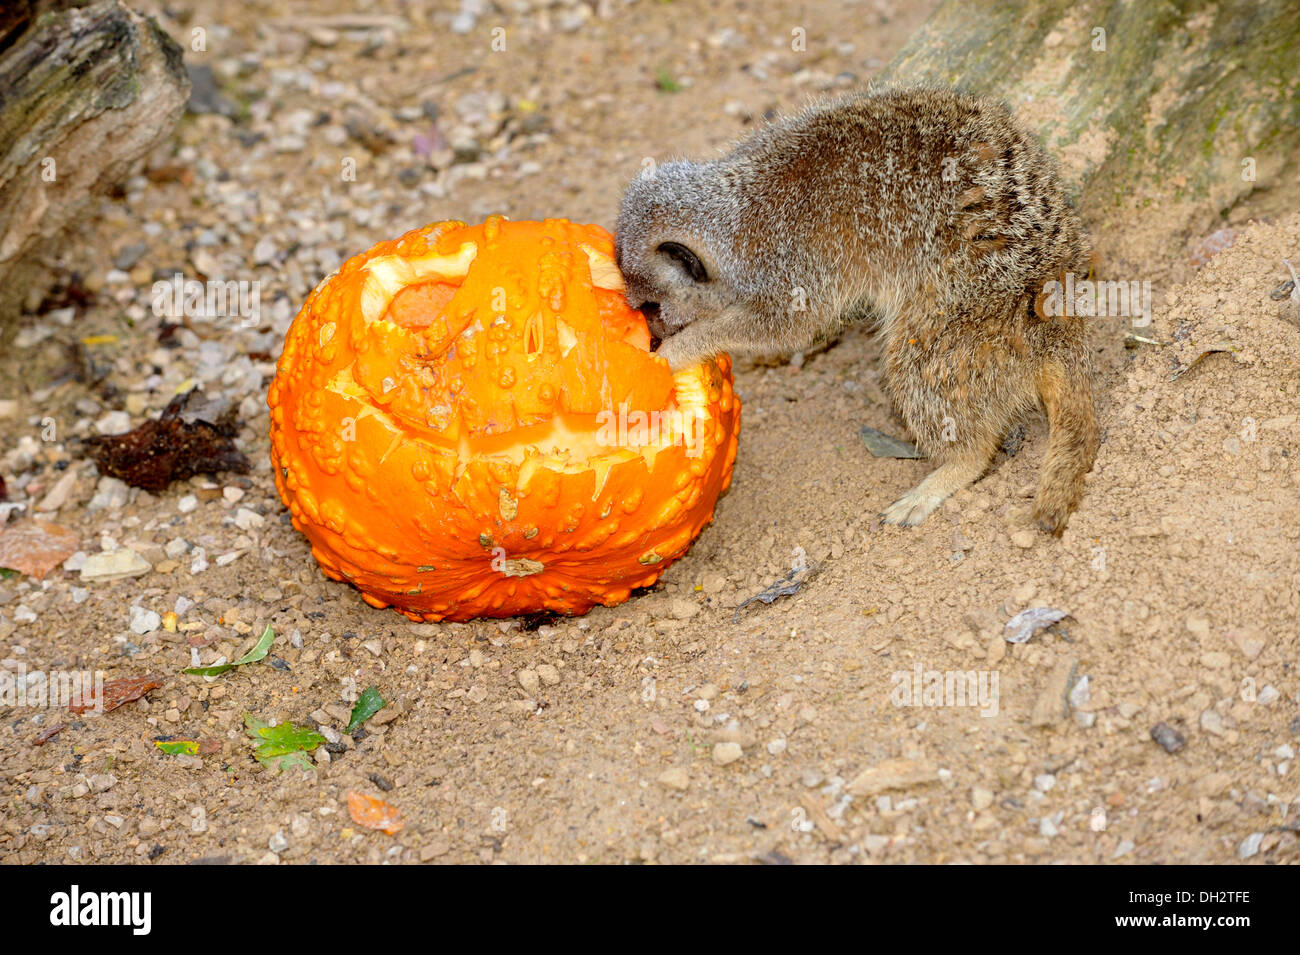 Dunstable, Bedfordshire, UK. 30th Oct, 2013. The animals at ZSL Whipsnade Zoo will be getting their fangs into some tasty treats , as they’re dished up pumpkin platters to get them into the spooky spirit. Meerkats Paul, George and Ringo are enjoying a breakfast of crickets hidden inside Jack O ’Lanterns. © Brian Jordan/Alamy Live News Stock Photo